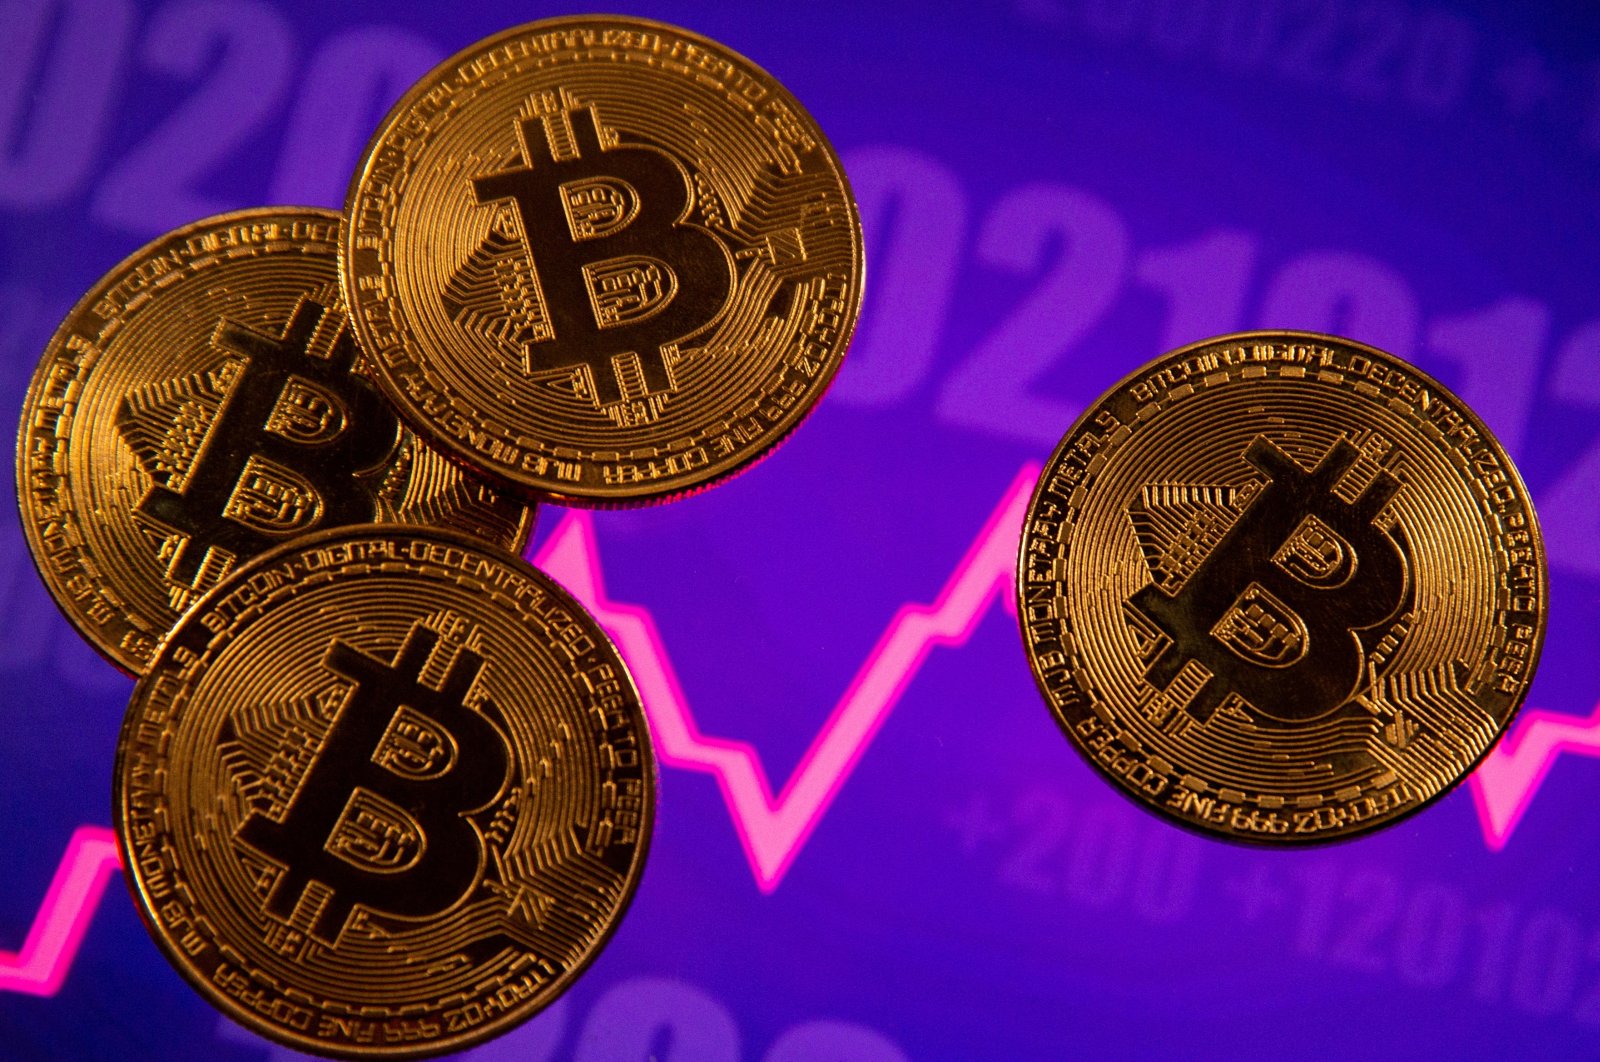 A representation of the virtual currency Bitcoin is seen in front of a stock graph in this illustration taken on March 15, 2021. (Reuters Photo)